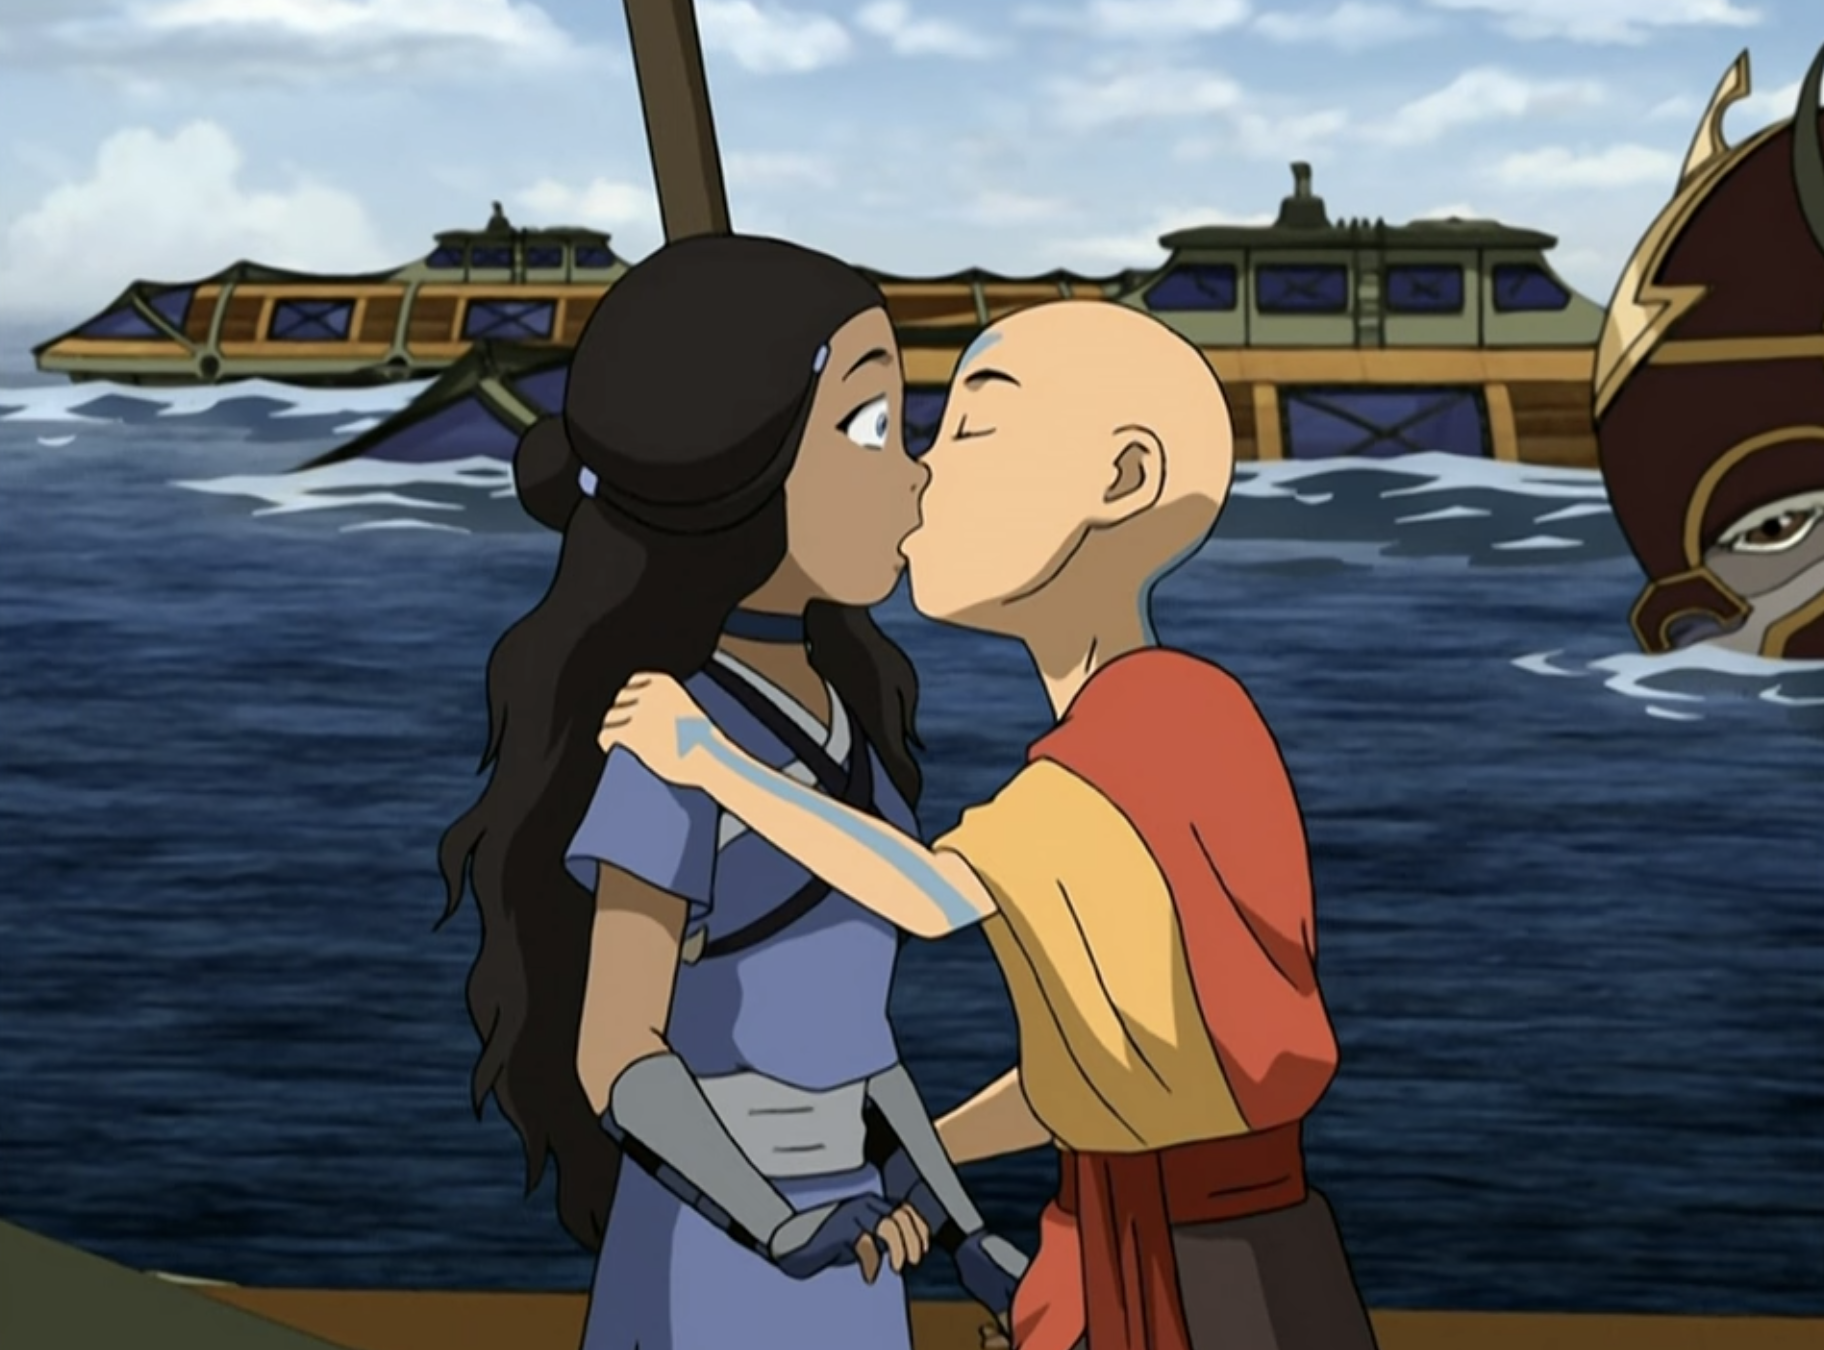 Aang kissing Katara, who&#x27;s leaning back with open eyes.